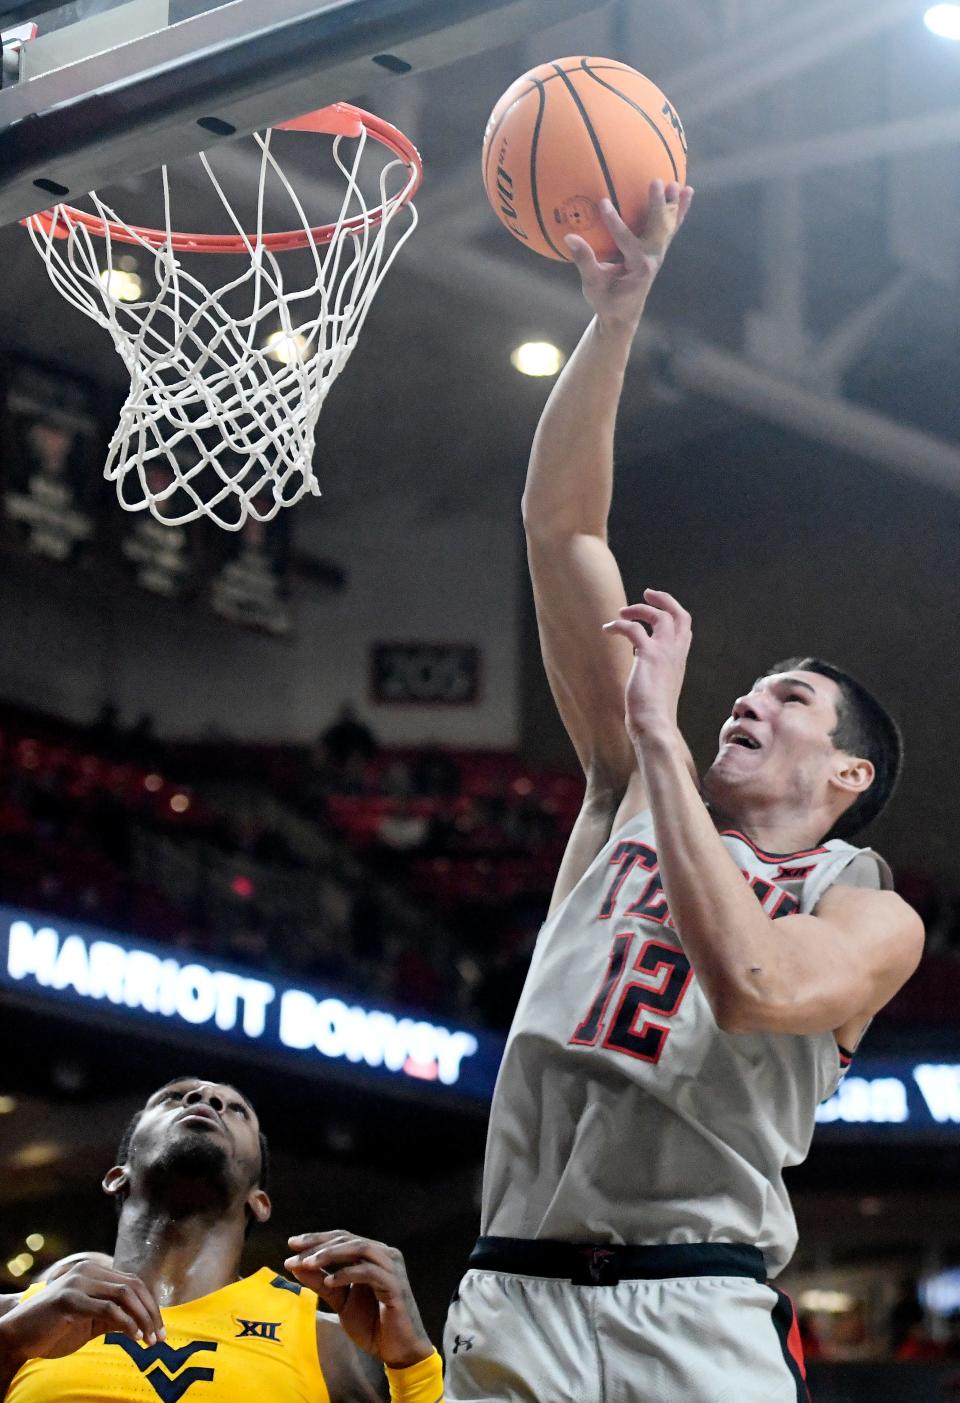 Texas Tech's forward Daniel Batcho (12) goes for a layup against West Virginia in a Big 12 basketball game, Wednesday, Jan. 25, 2023, at United Supermarkets Arena. 